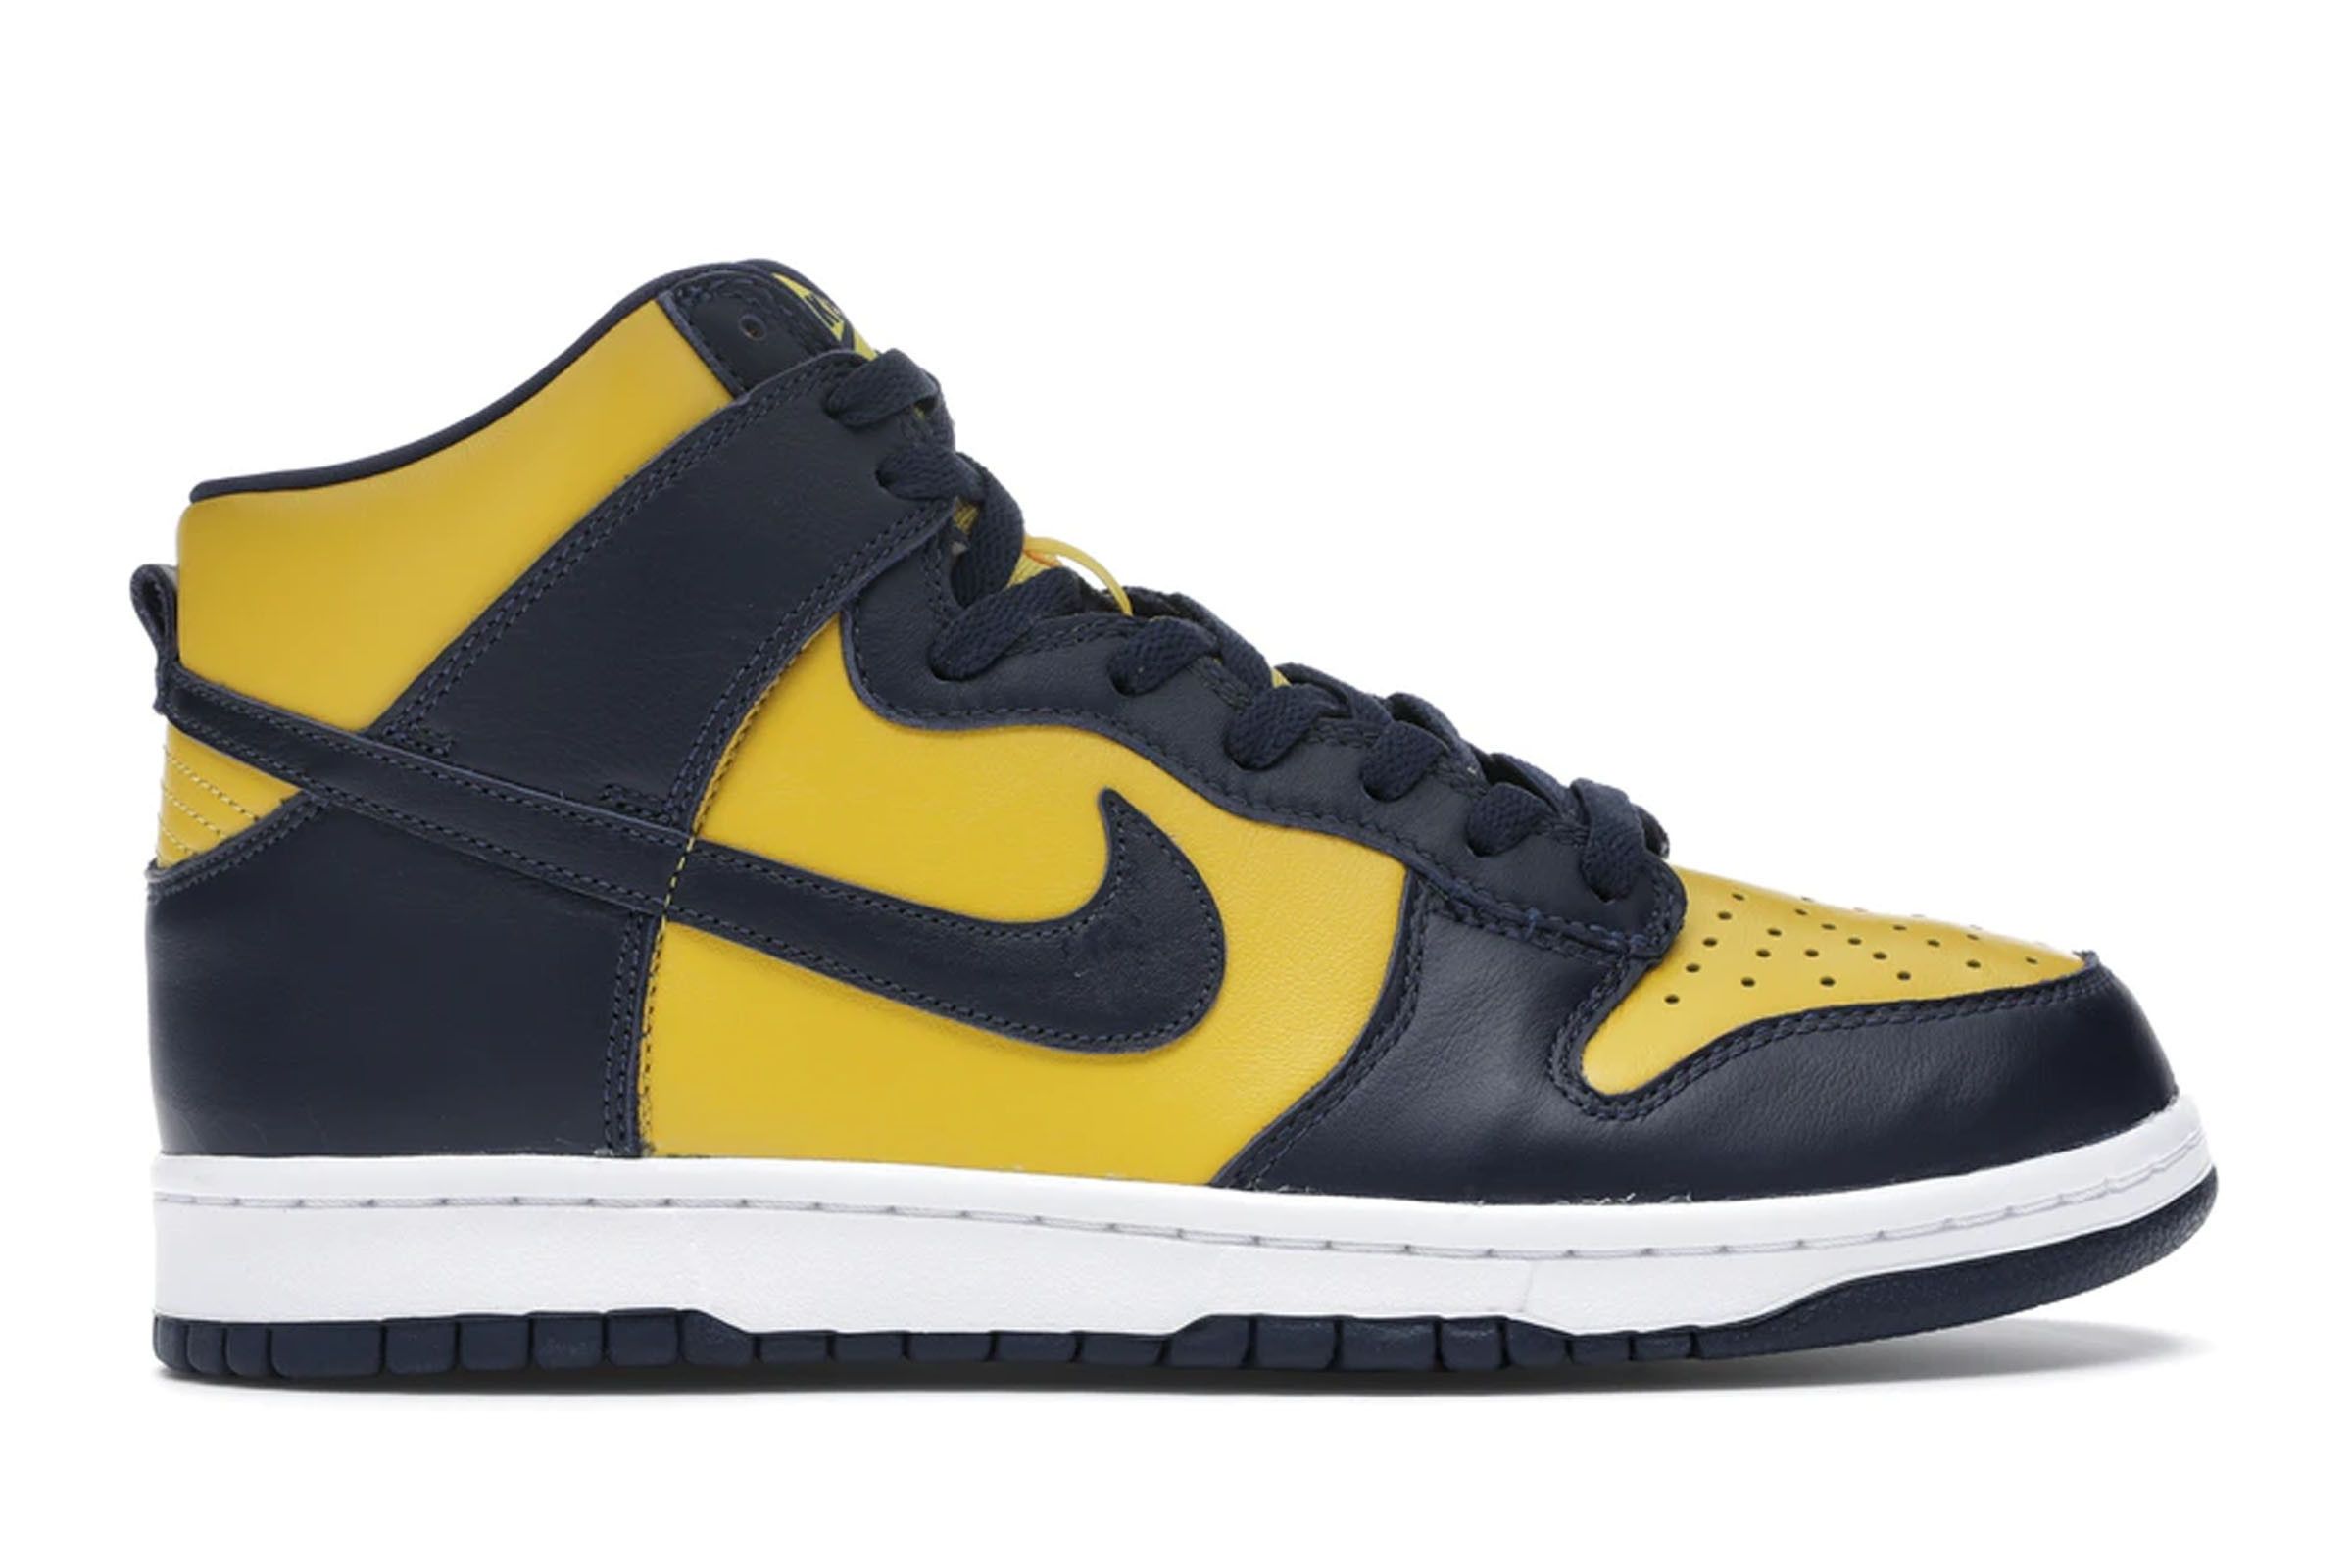 Nike Dunk “Be True To Your School” Series